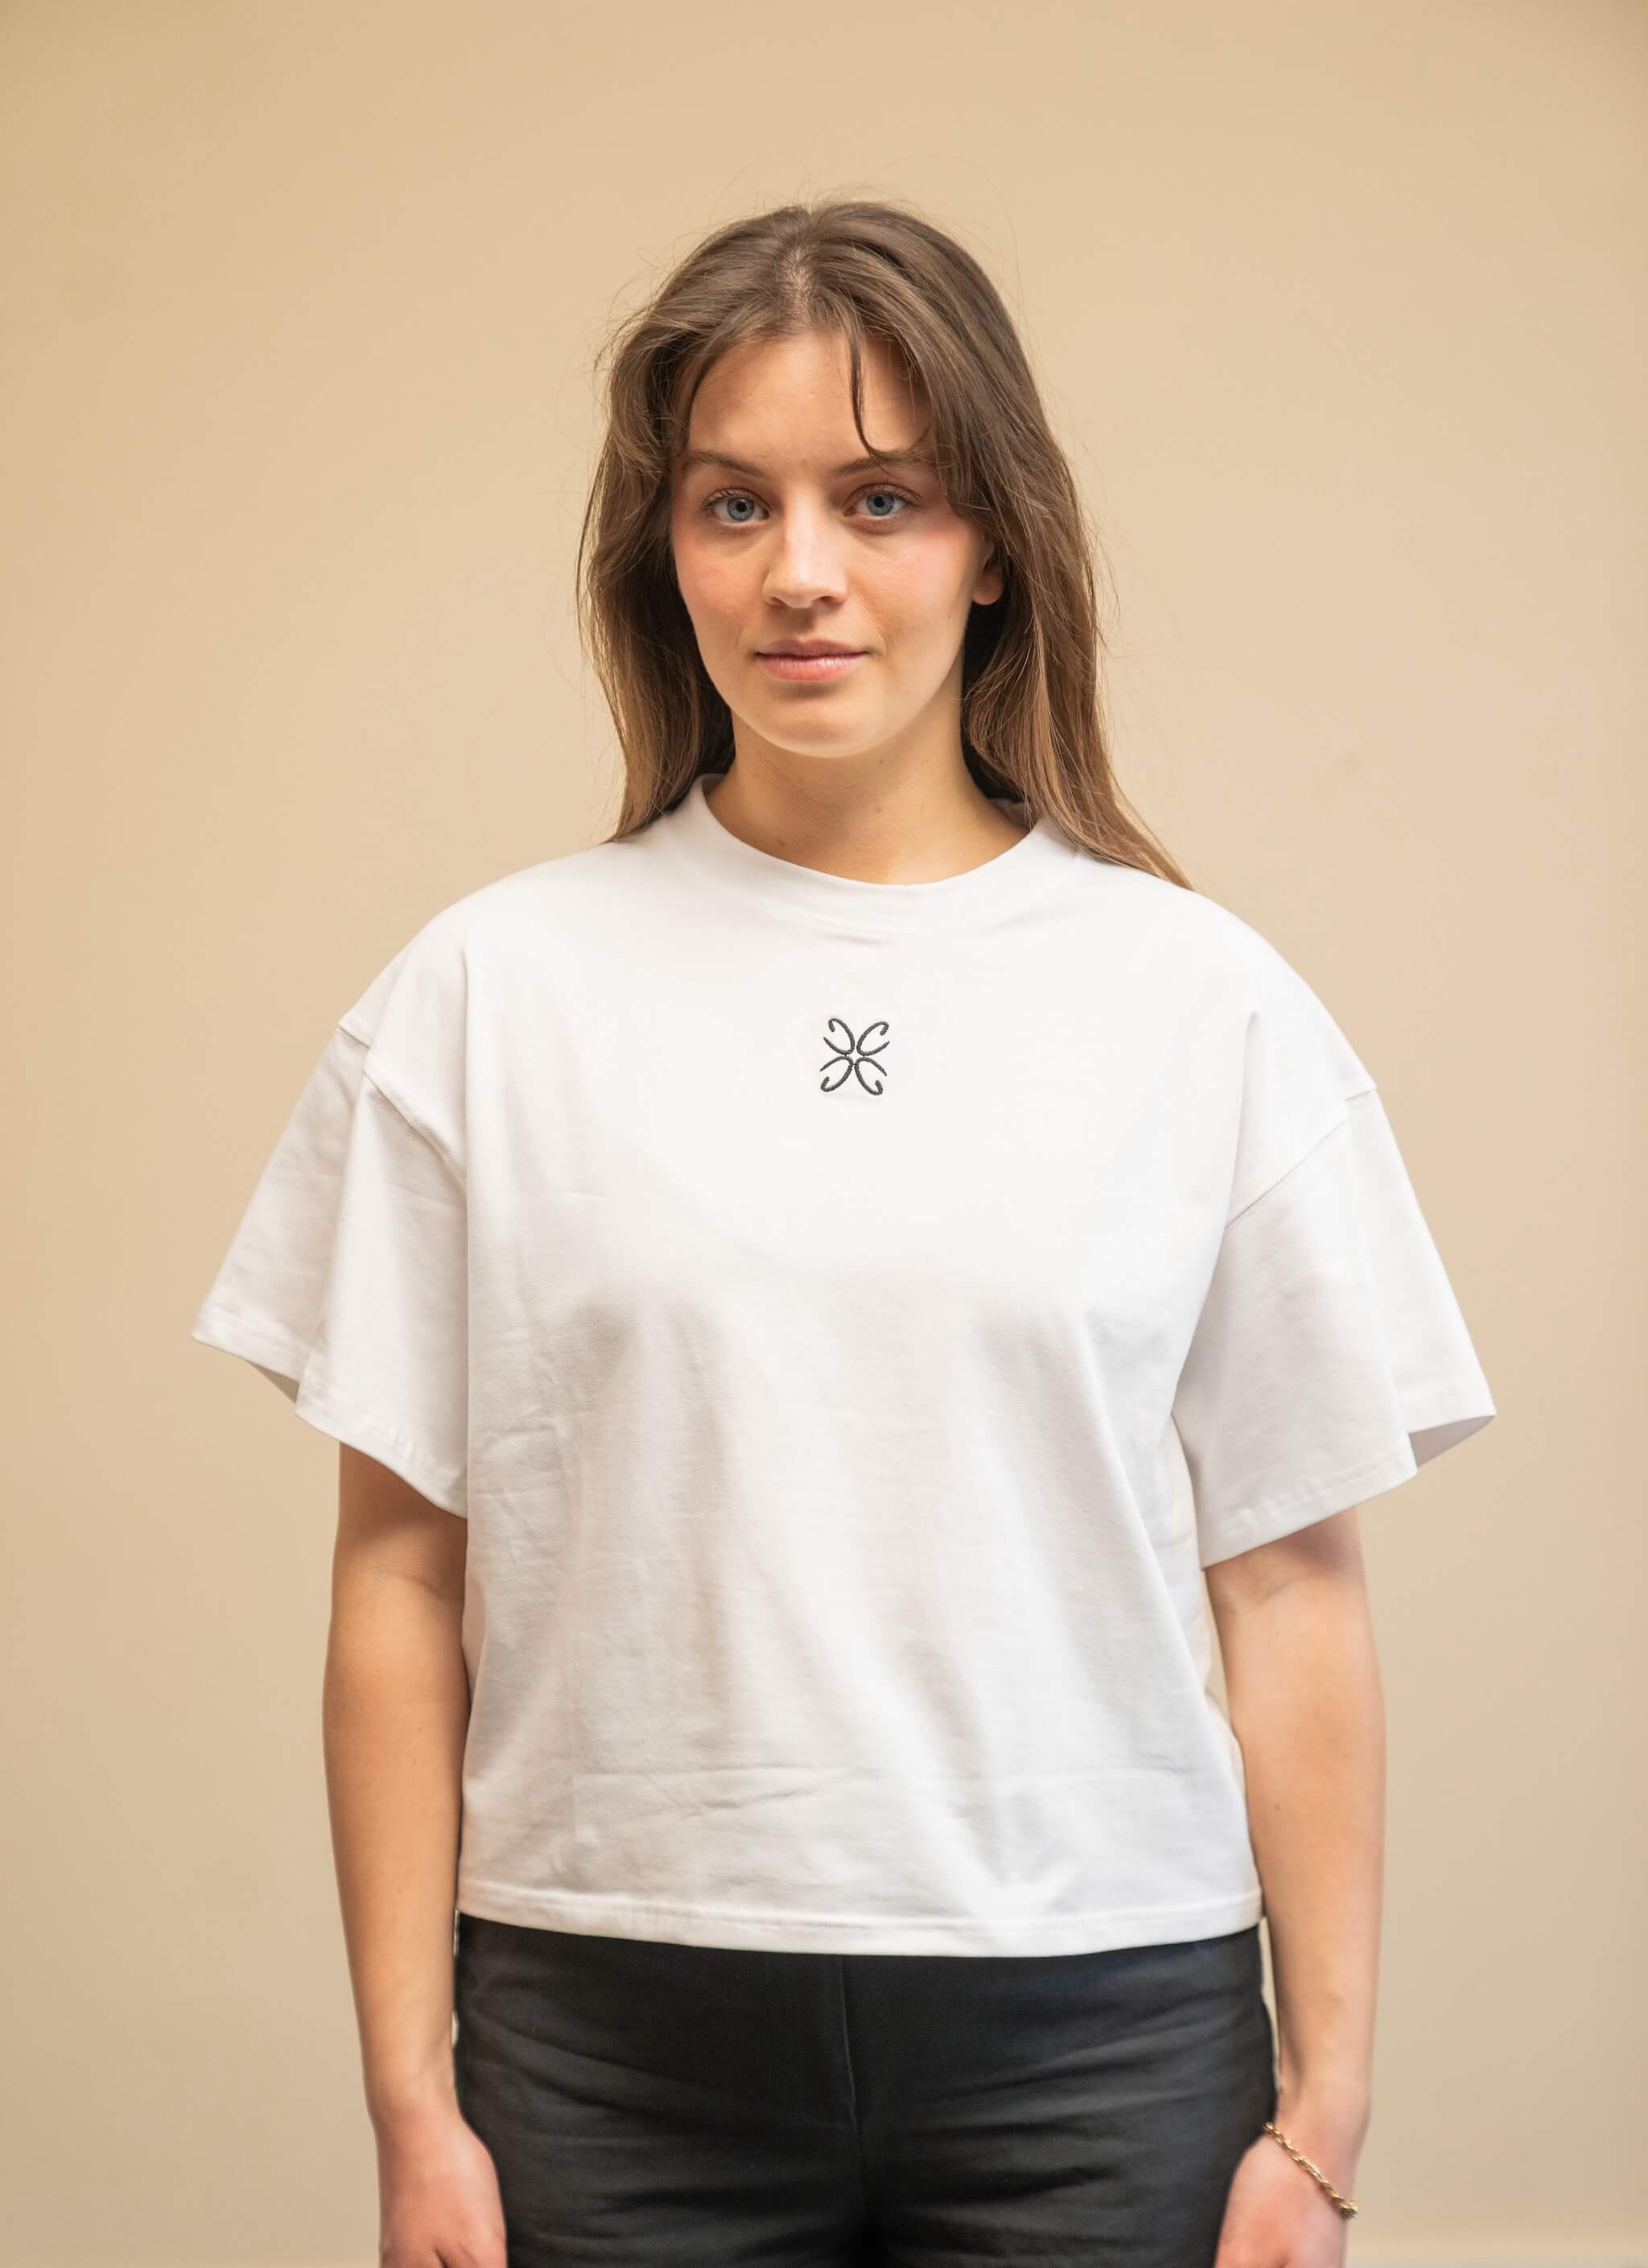 Woman wearing a white t-shirt from Cyme Copenhagen's spring/summer collection. The t-shirt features a simple design with a black logo in the center. The model stands against a neutral background, highlighting the minimalist and stylish appeal of the garment.